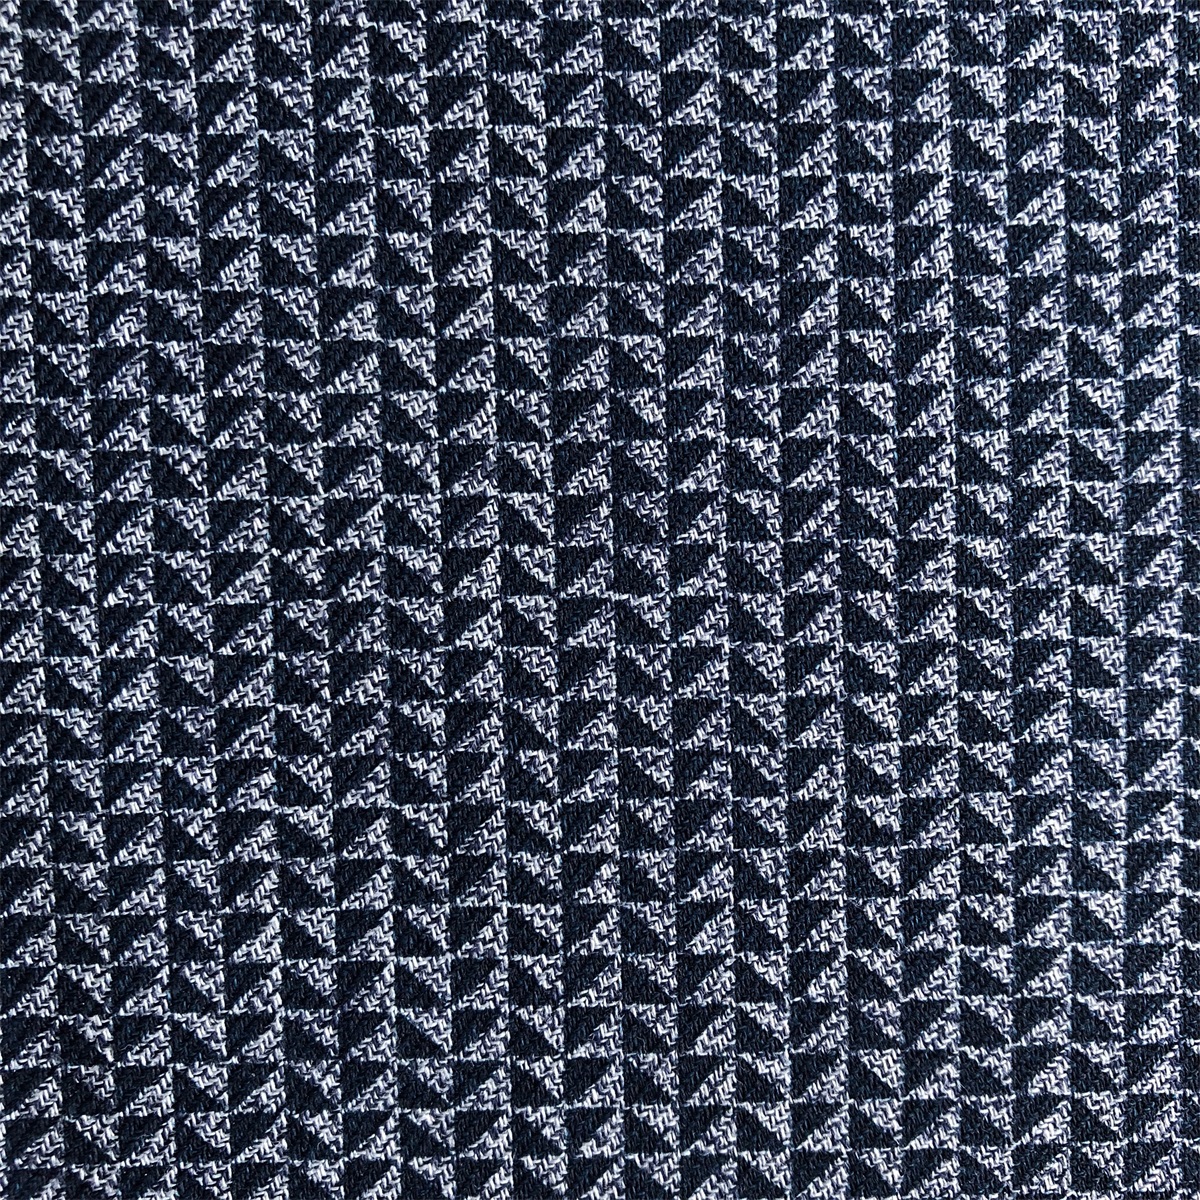 Cotton Fabric by compact mouline yarn for men's casual shirts 100% cotton printed on yarn dyed twill chambray woven shirts fabric